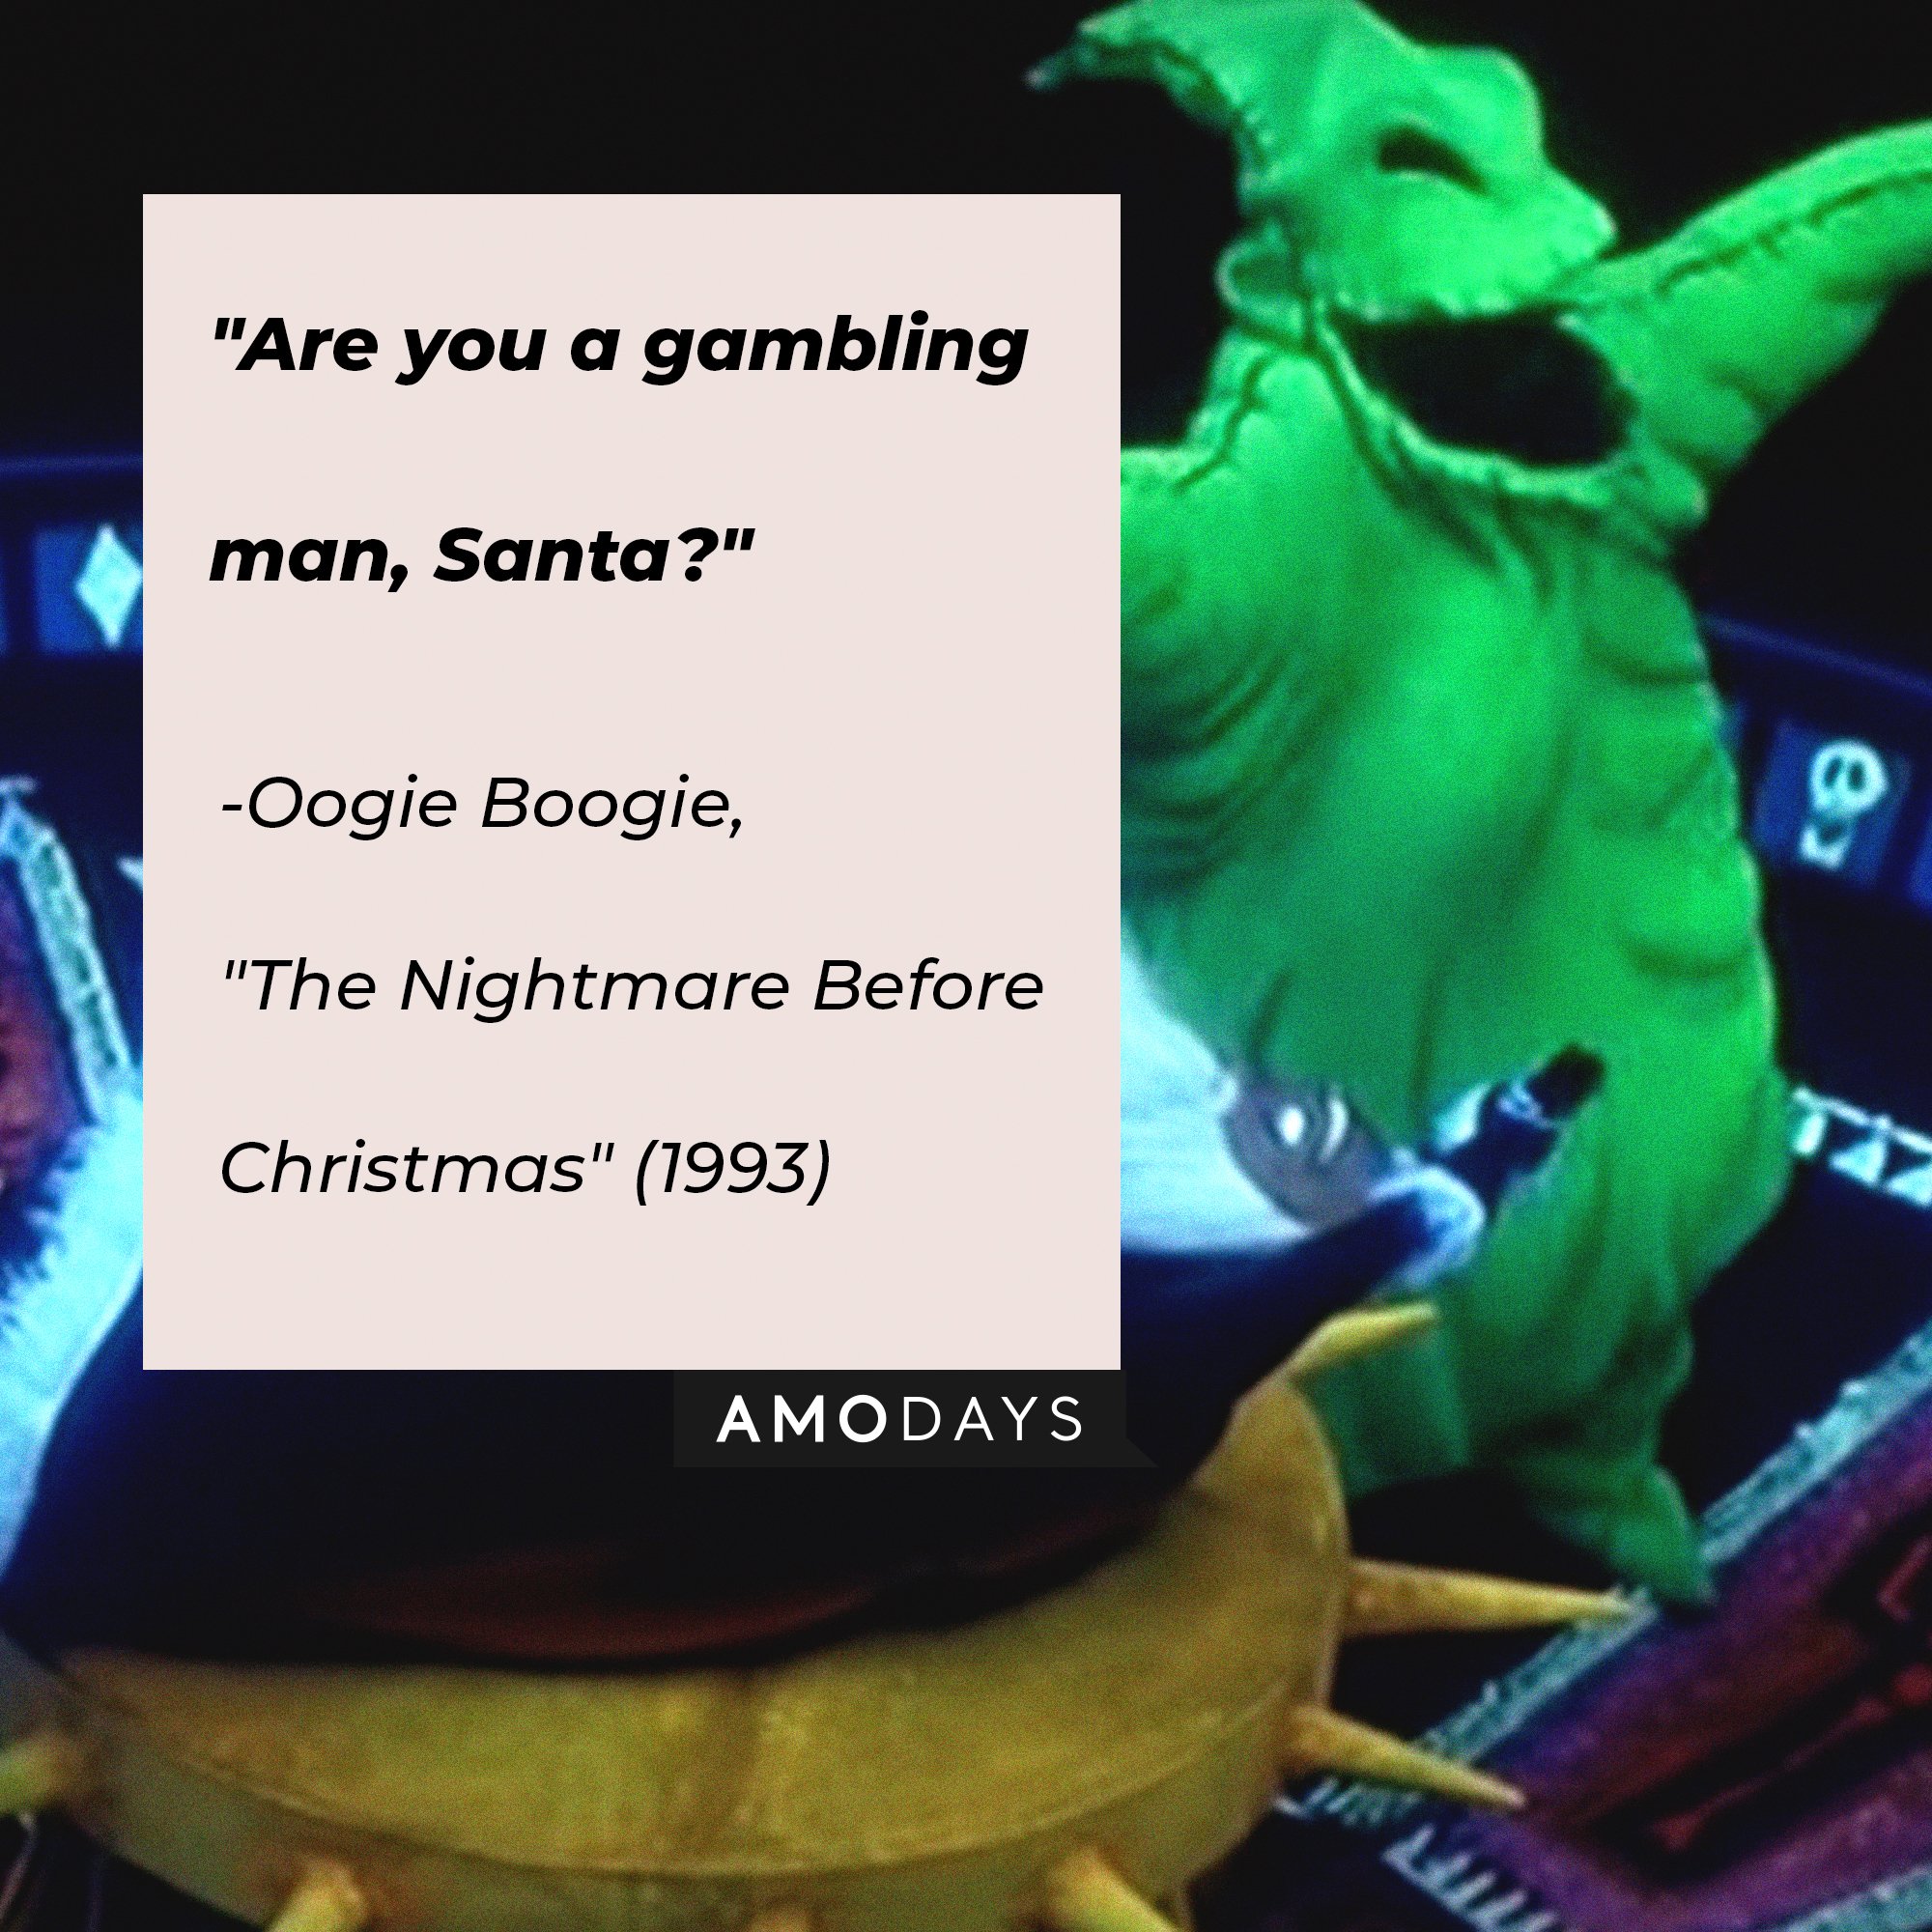  Oogie Boogie’s quote from "The Nightmare Before Christmas": "Are you a gambling man, Santa?" | Image: AmoDays